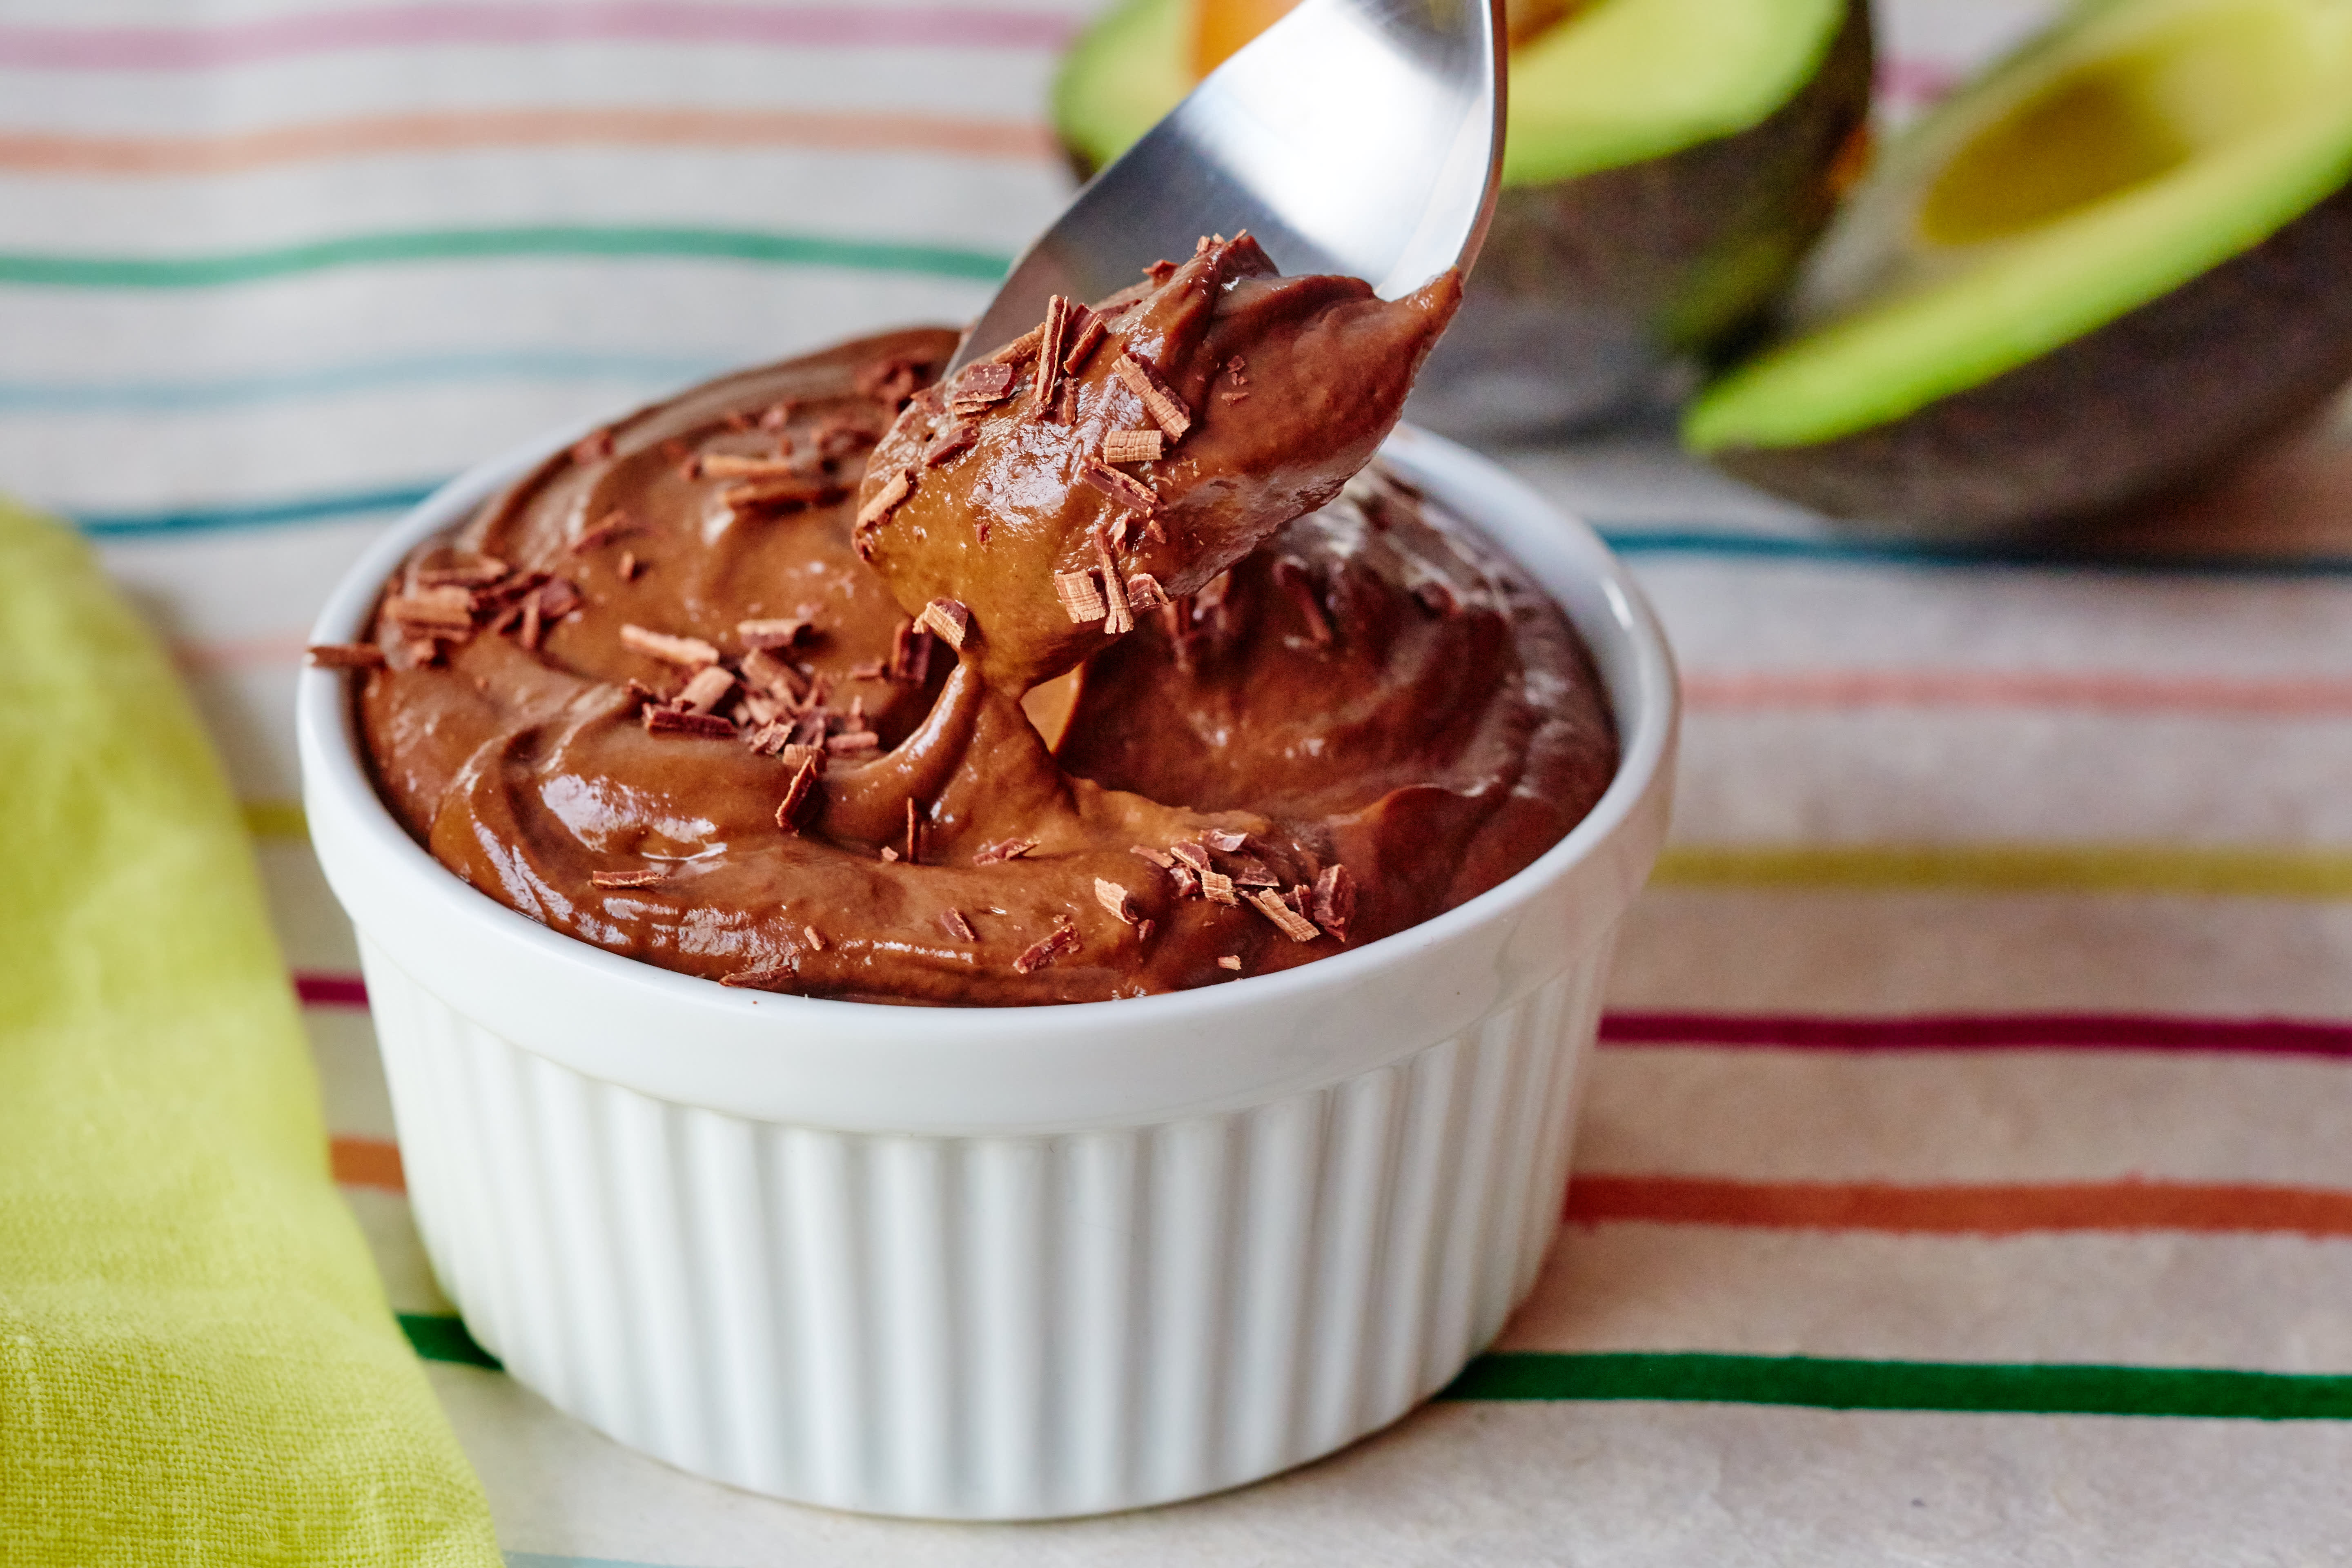 How To Make the Best Chocolate Avocado Pudding | Kitchn